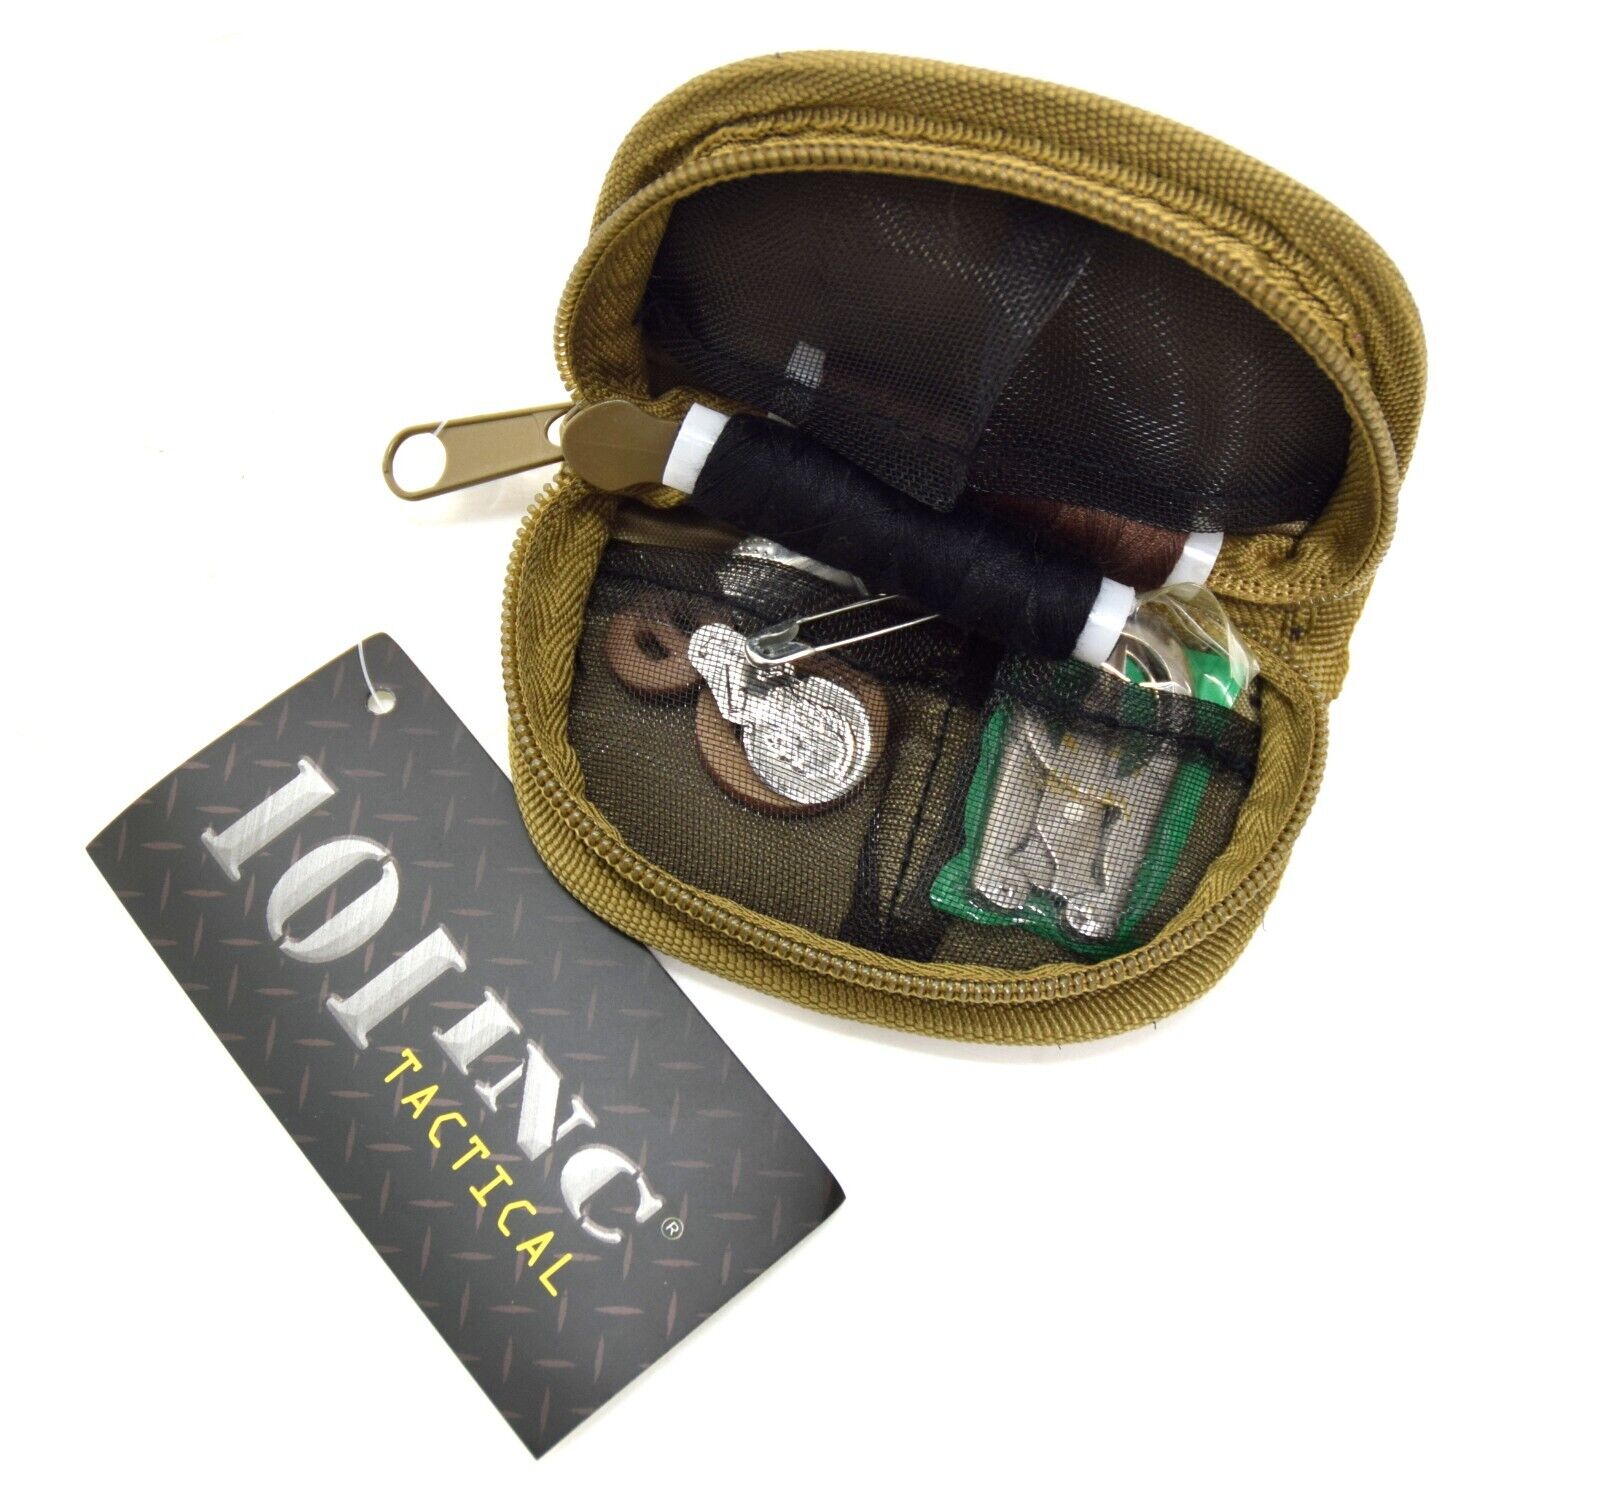 Military Cadet Sewing Kit in MTP Pouch Compact Repair THREAD NEEDLES SCISSORS